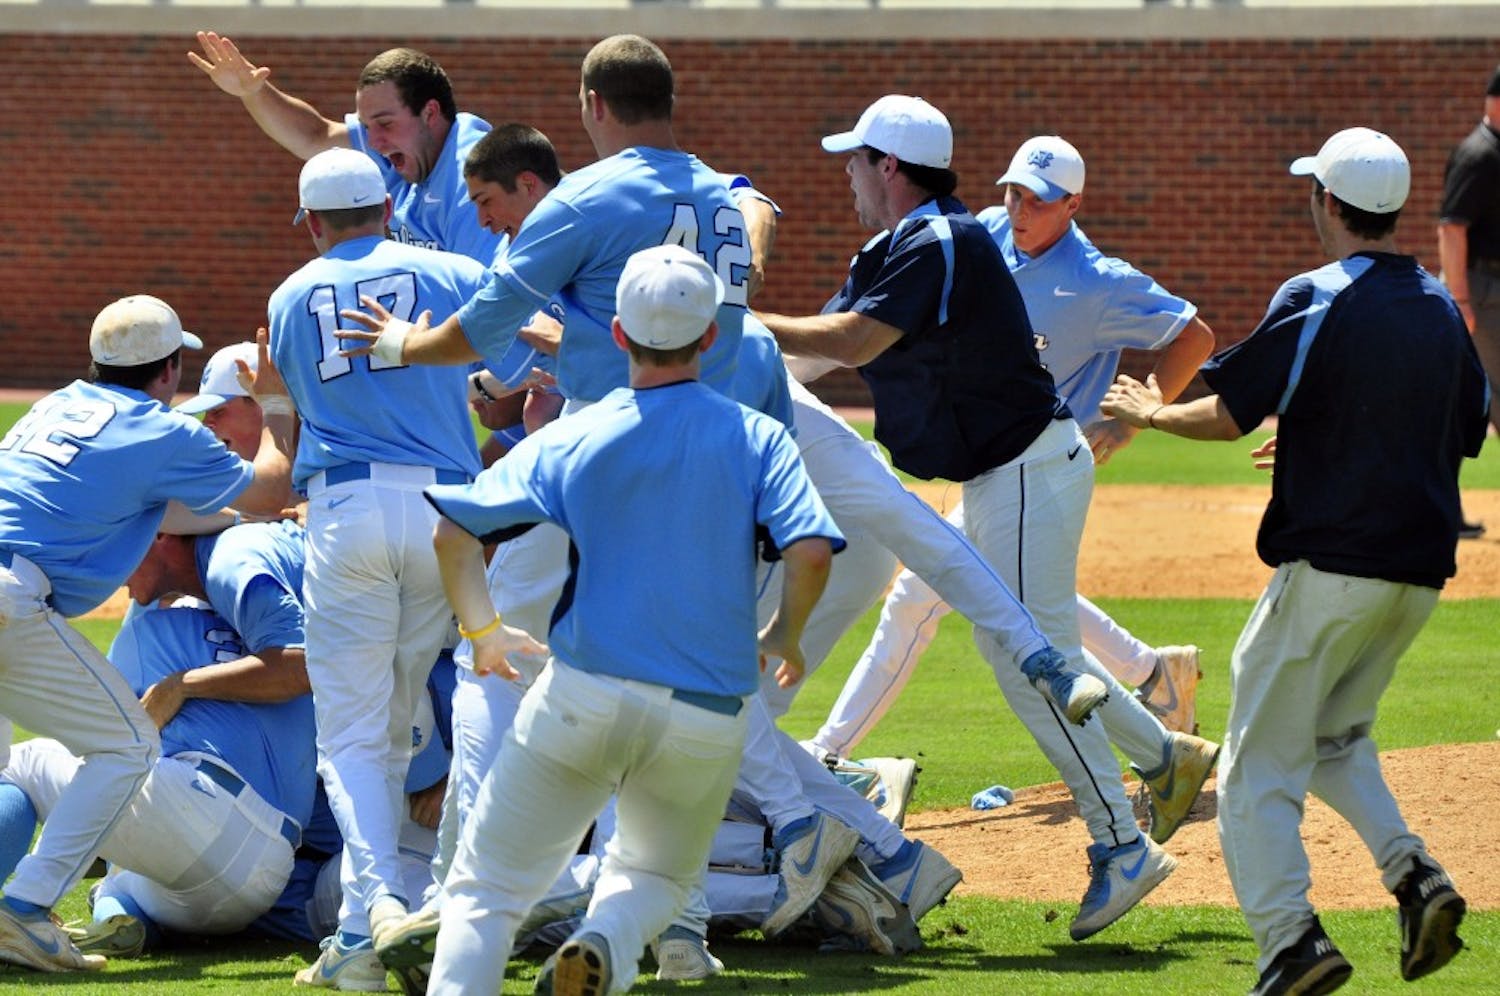 UNC players celebrate in a dog pile after the game.